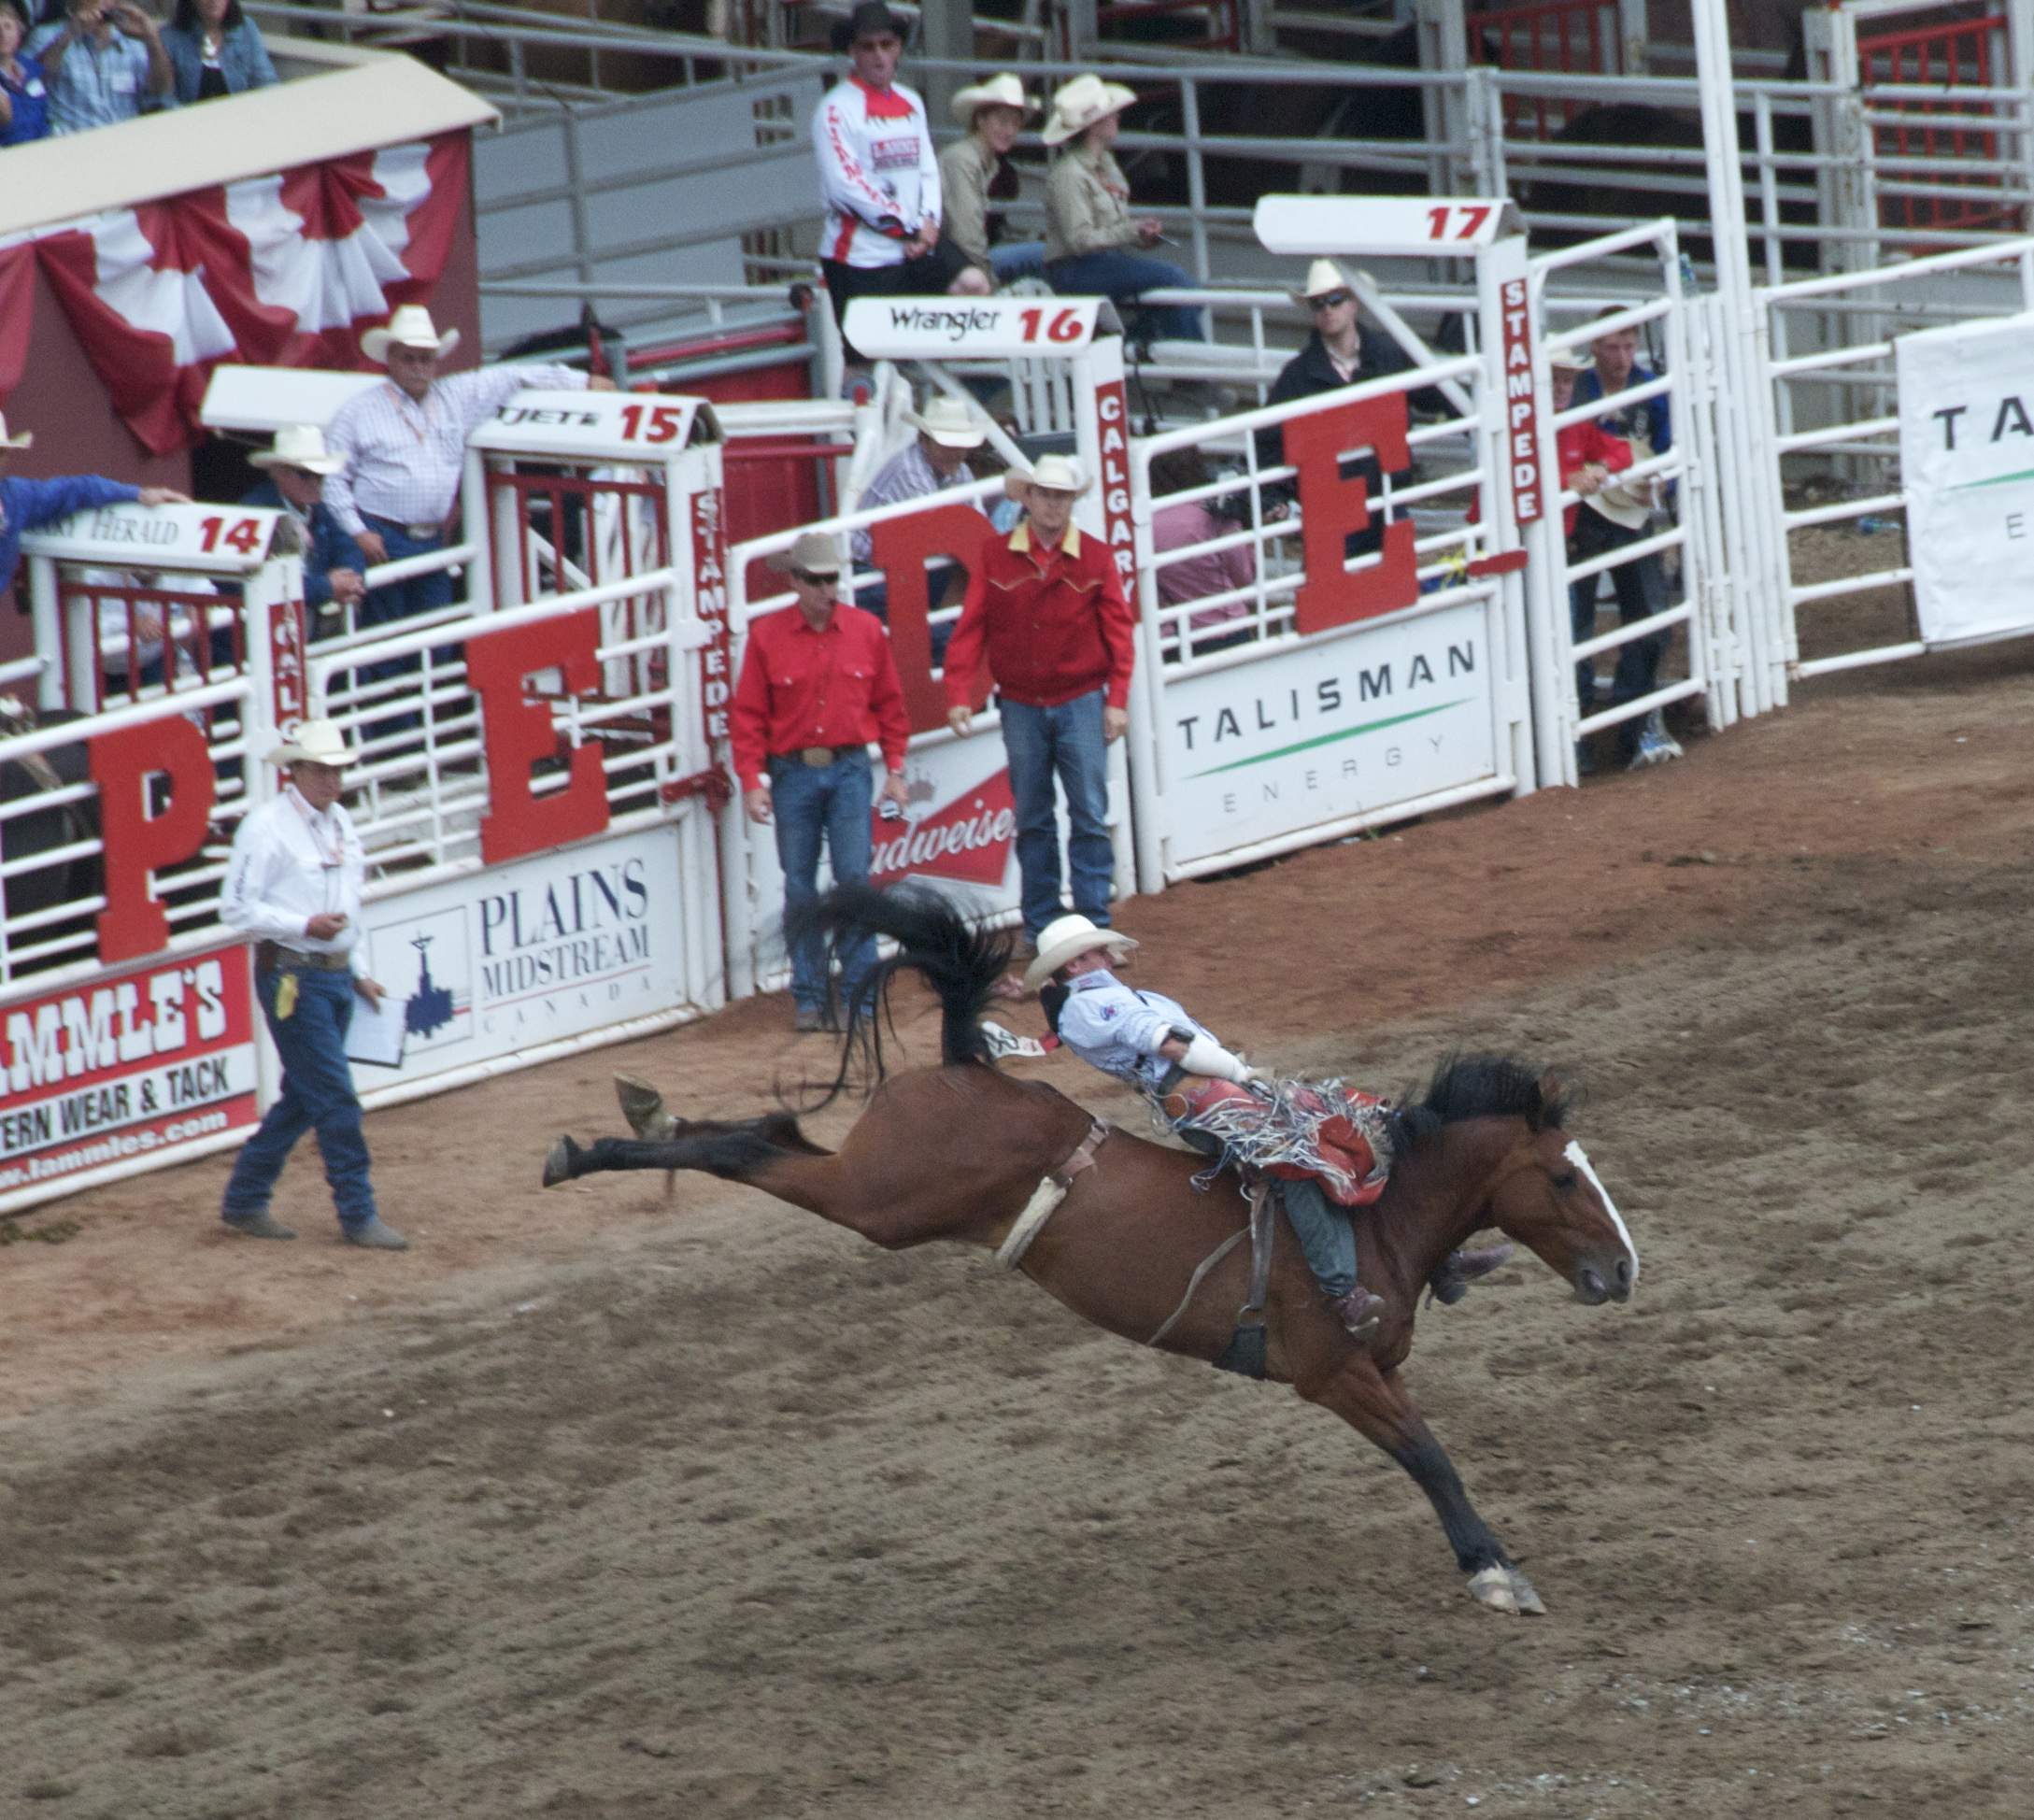 38 photos of the annual Calgary Stampede in Canada | BOOMSbeat2177 x 1948